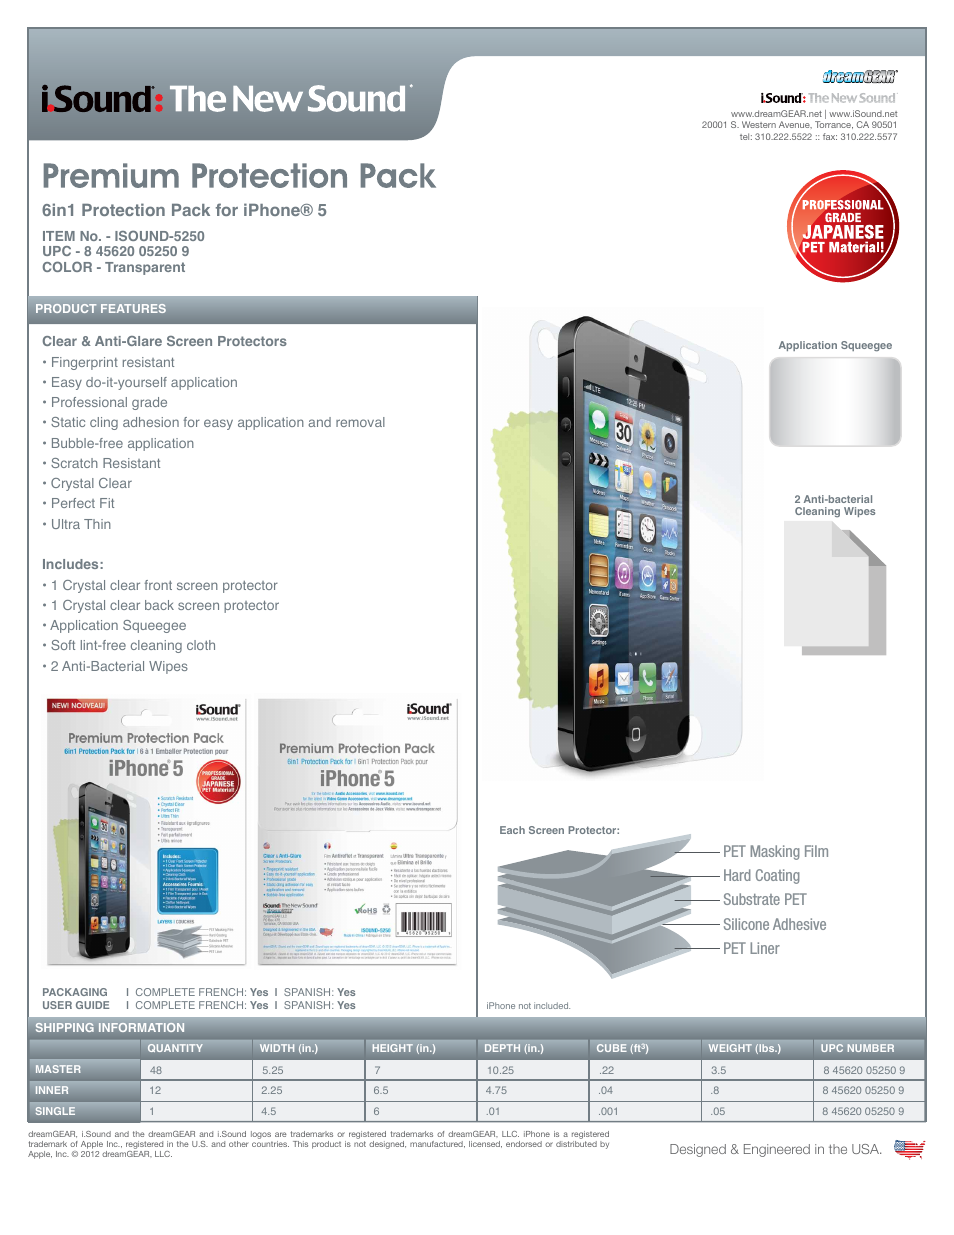 Premium Protection Pack - works with iPhone5 - Sell Sheet